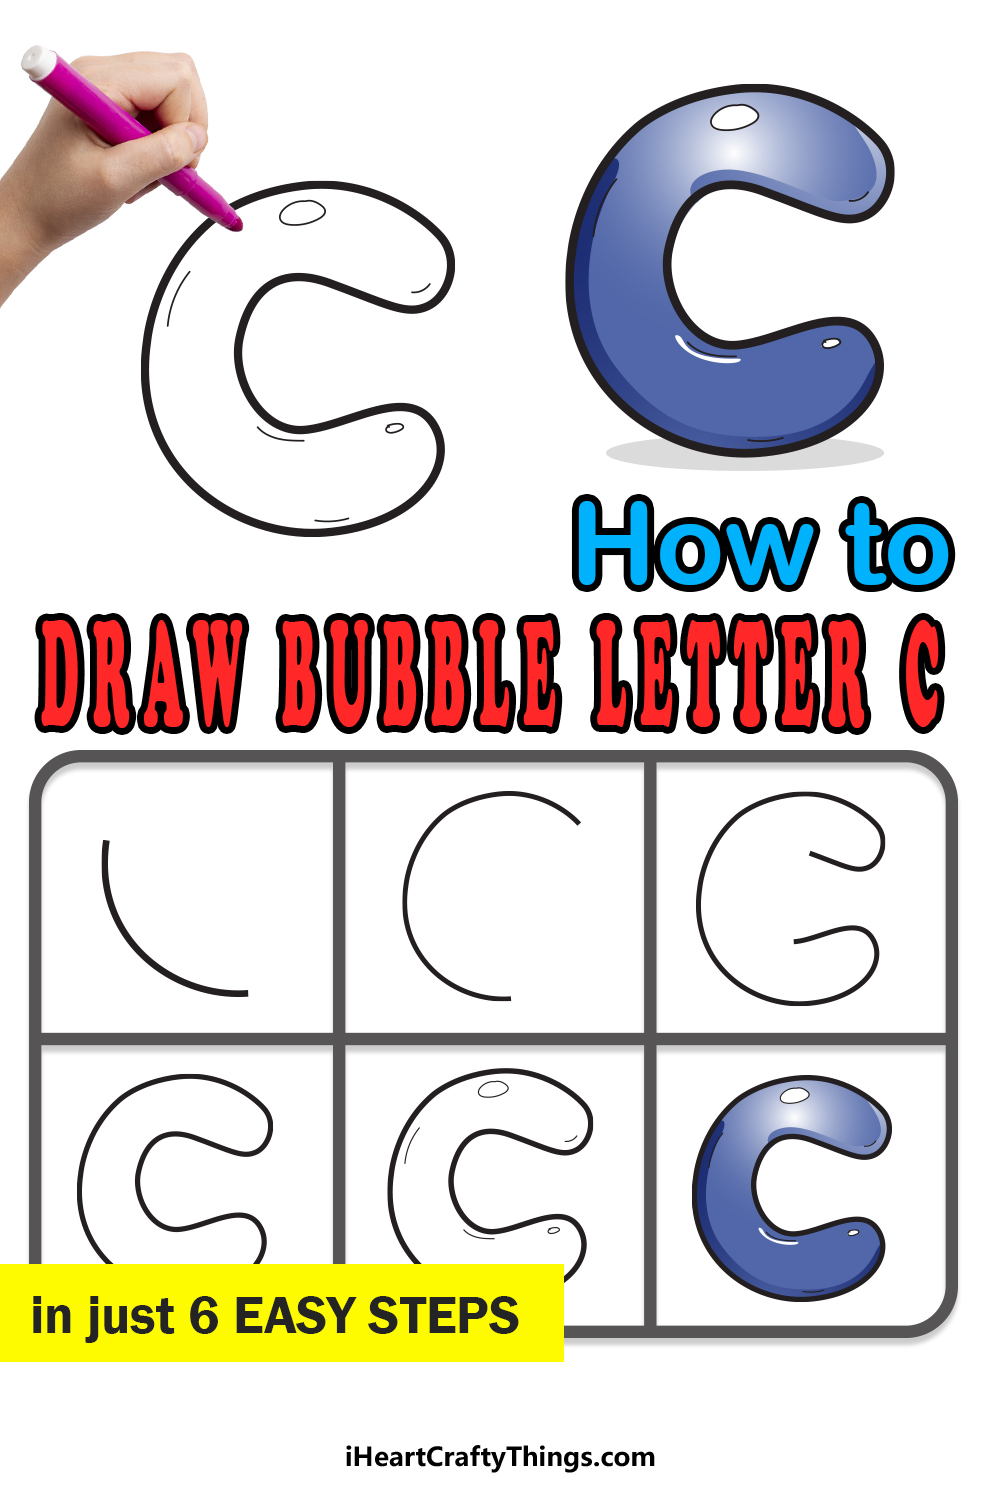 How To Draw Your Own Bubble C step by step guide